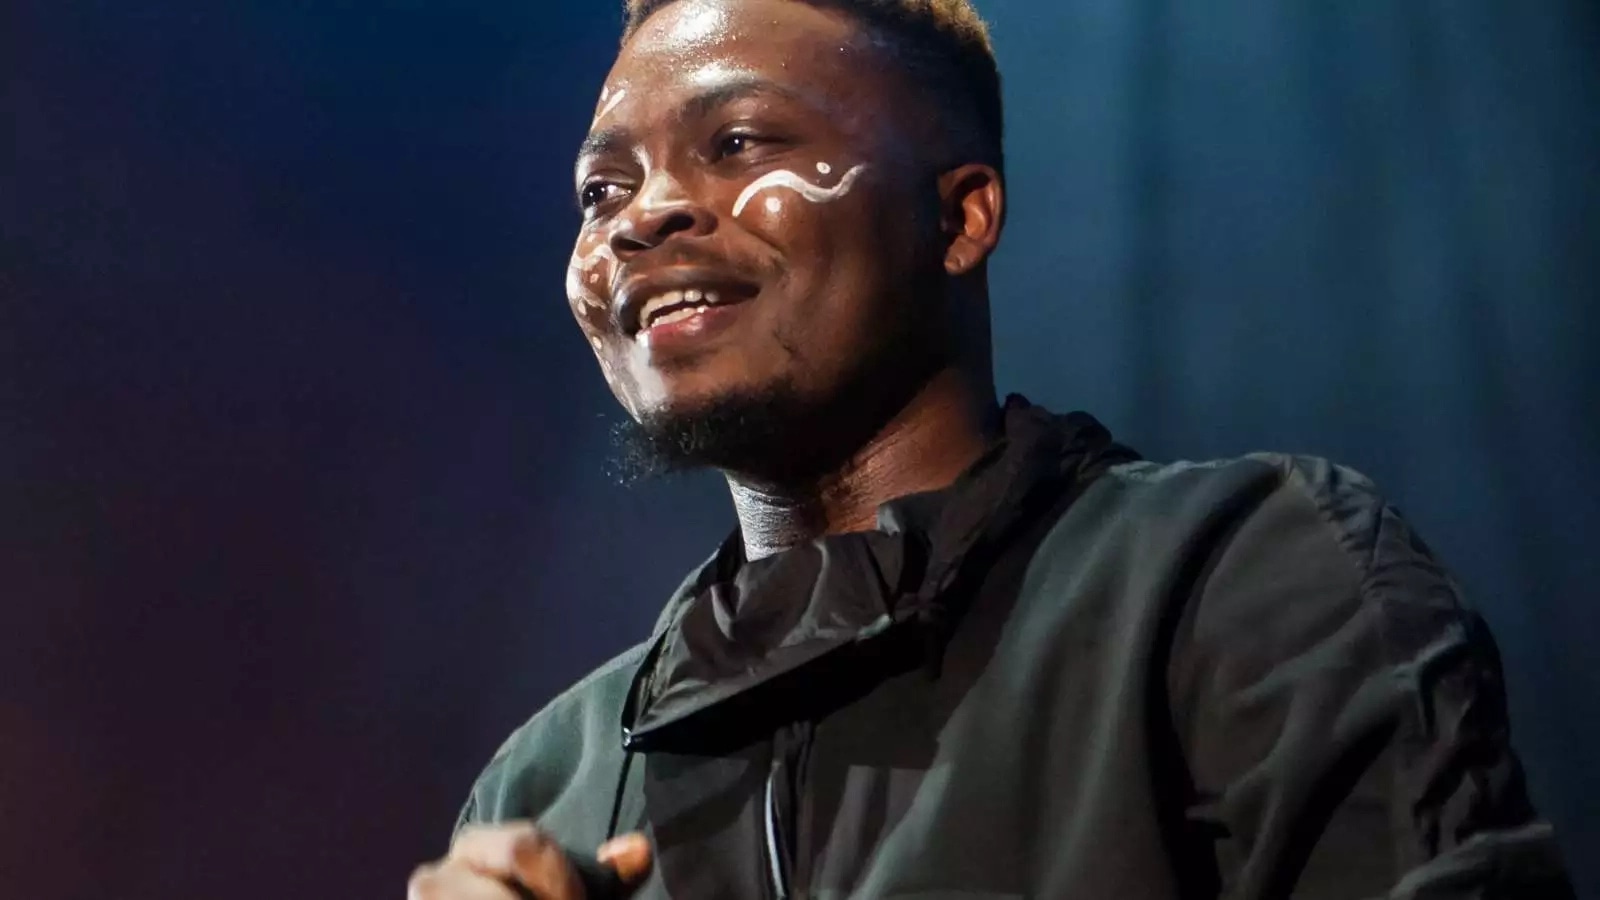 Olamide rated as Nigeria's highest paid artiste